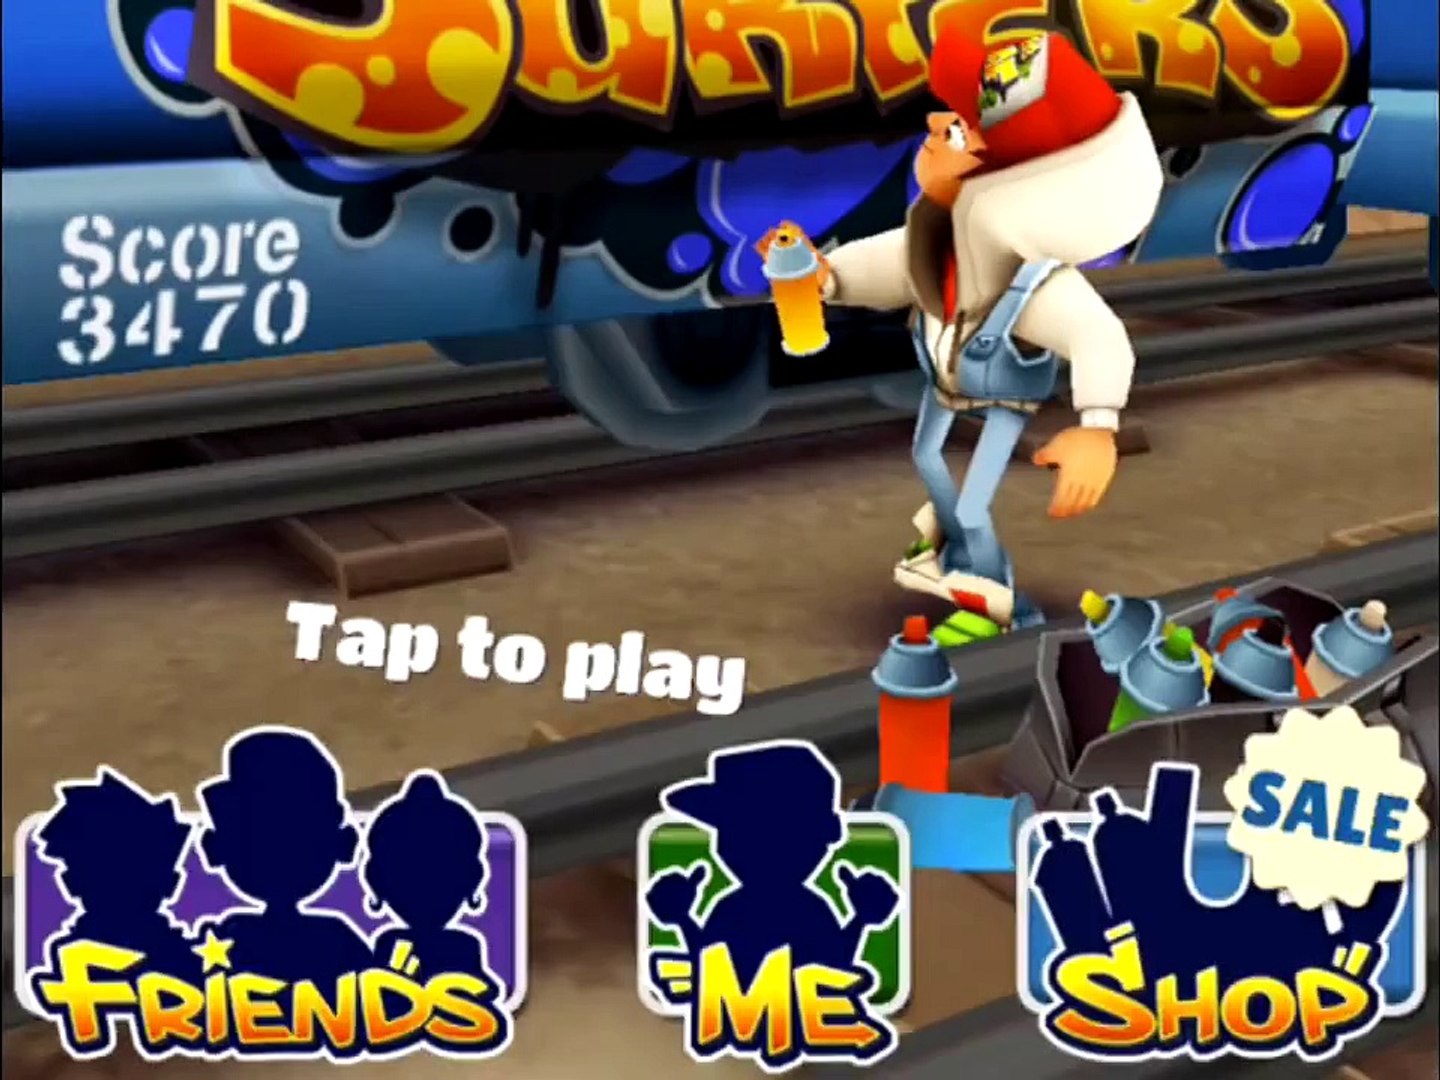 PLAY SUBWAY SURFERS GAMES ON PC 2016 JEUX ANDROID IOS FULL HD - Vidéo  Dailymotion